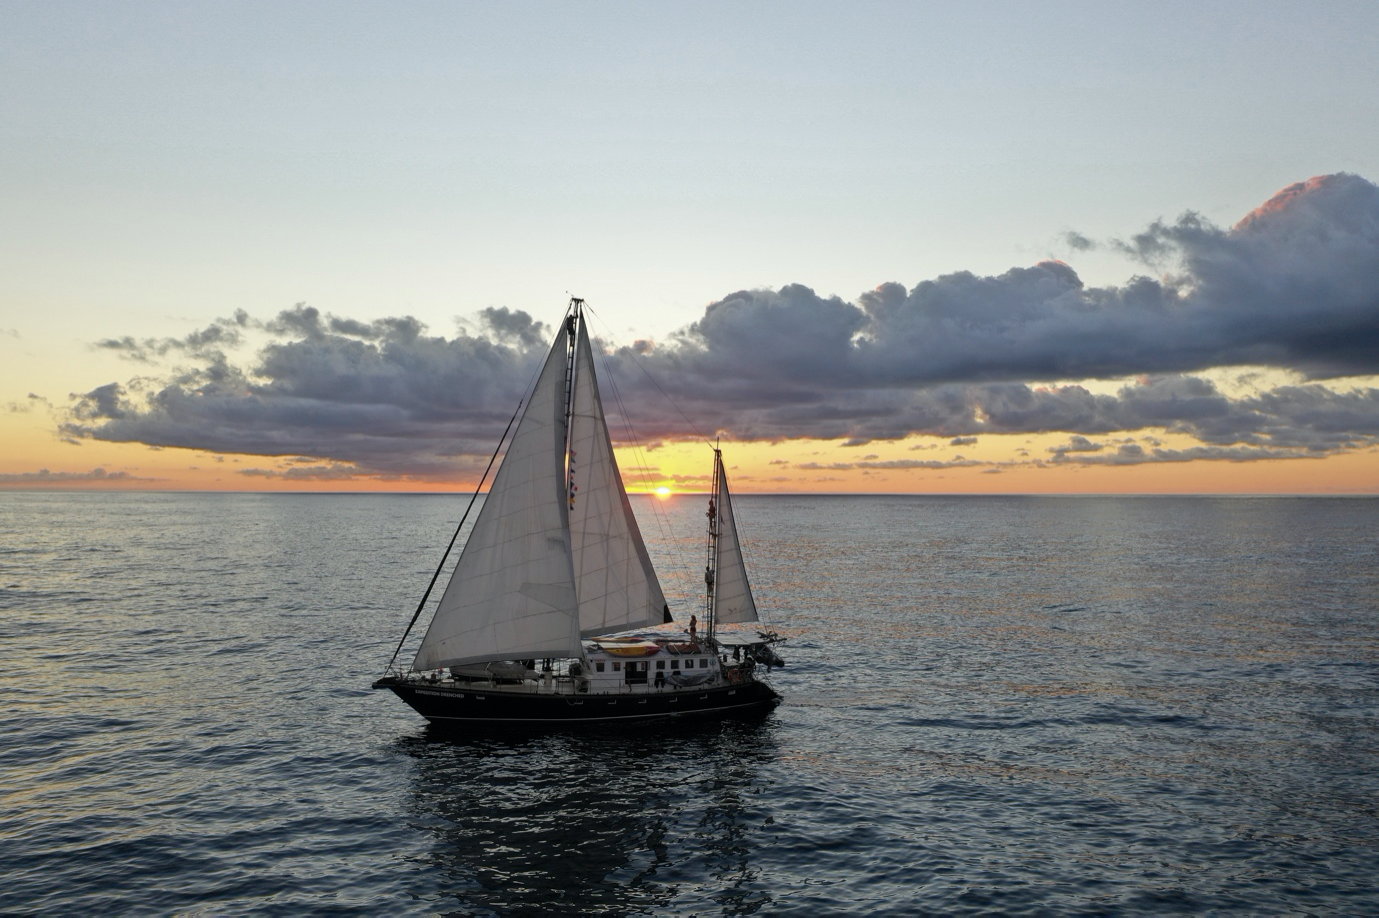 We are sailors, divers and nomads of the sea, living communally aboard a sailboat named Sylfia. Image by Captain Nate.